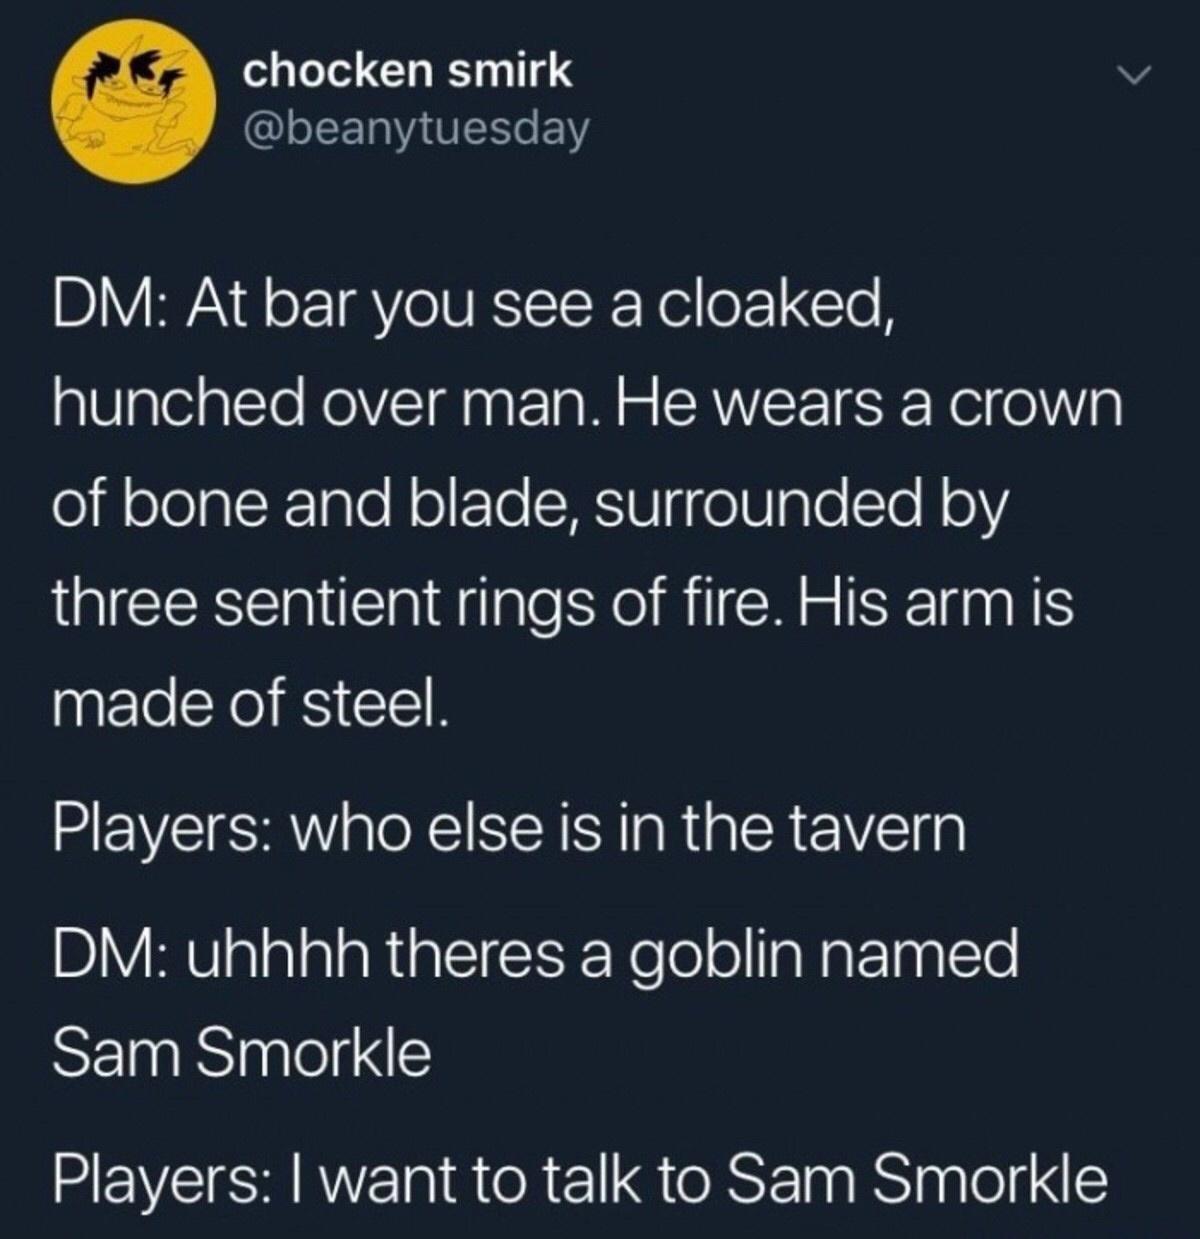 sam smorkle dnd - chocken smirk Dm At bar you see a cloaked, hunched over man. He wears a crown of bone and blade, surrounded by three sentient rings of fire. His arm is made of steel. Players who else is in the tavern Dm uhhhh theres a goblin named Sam S